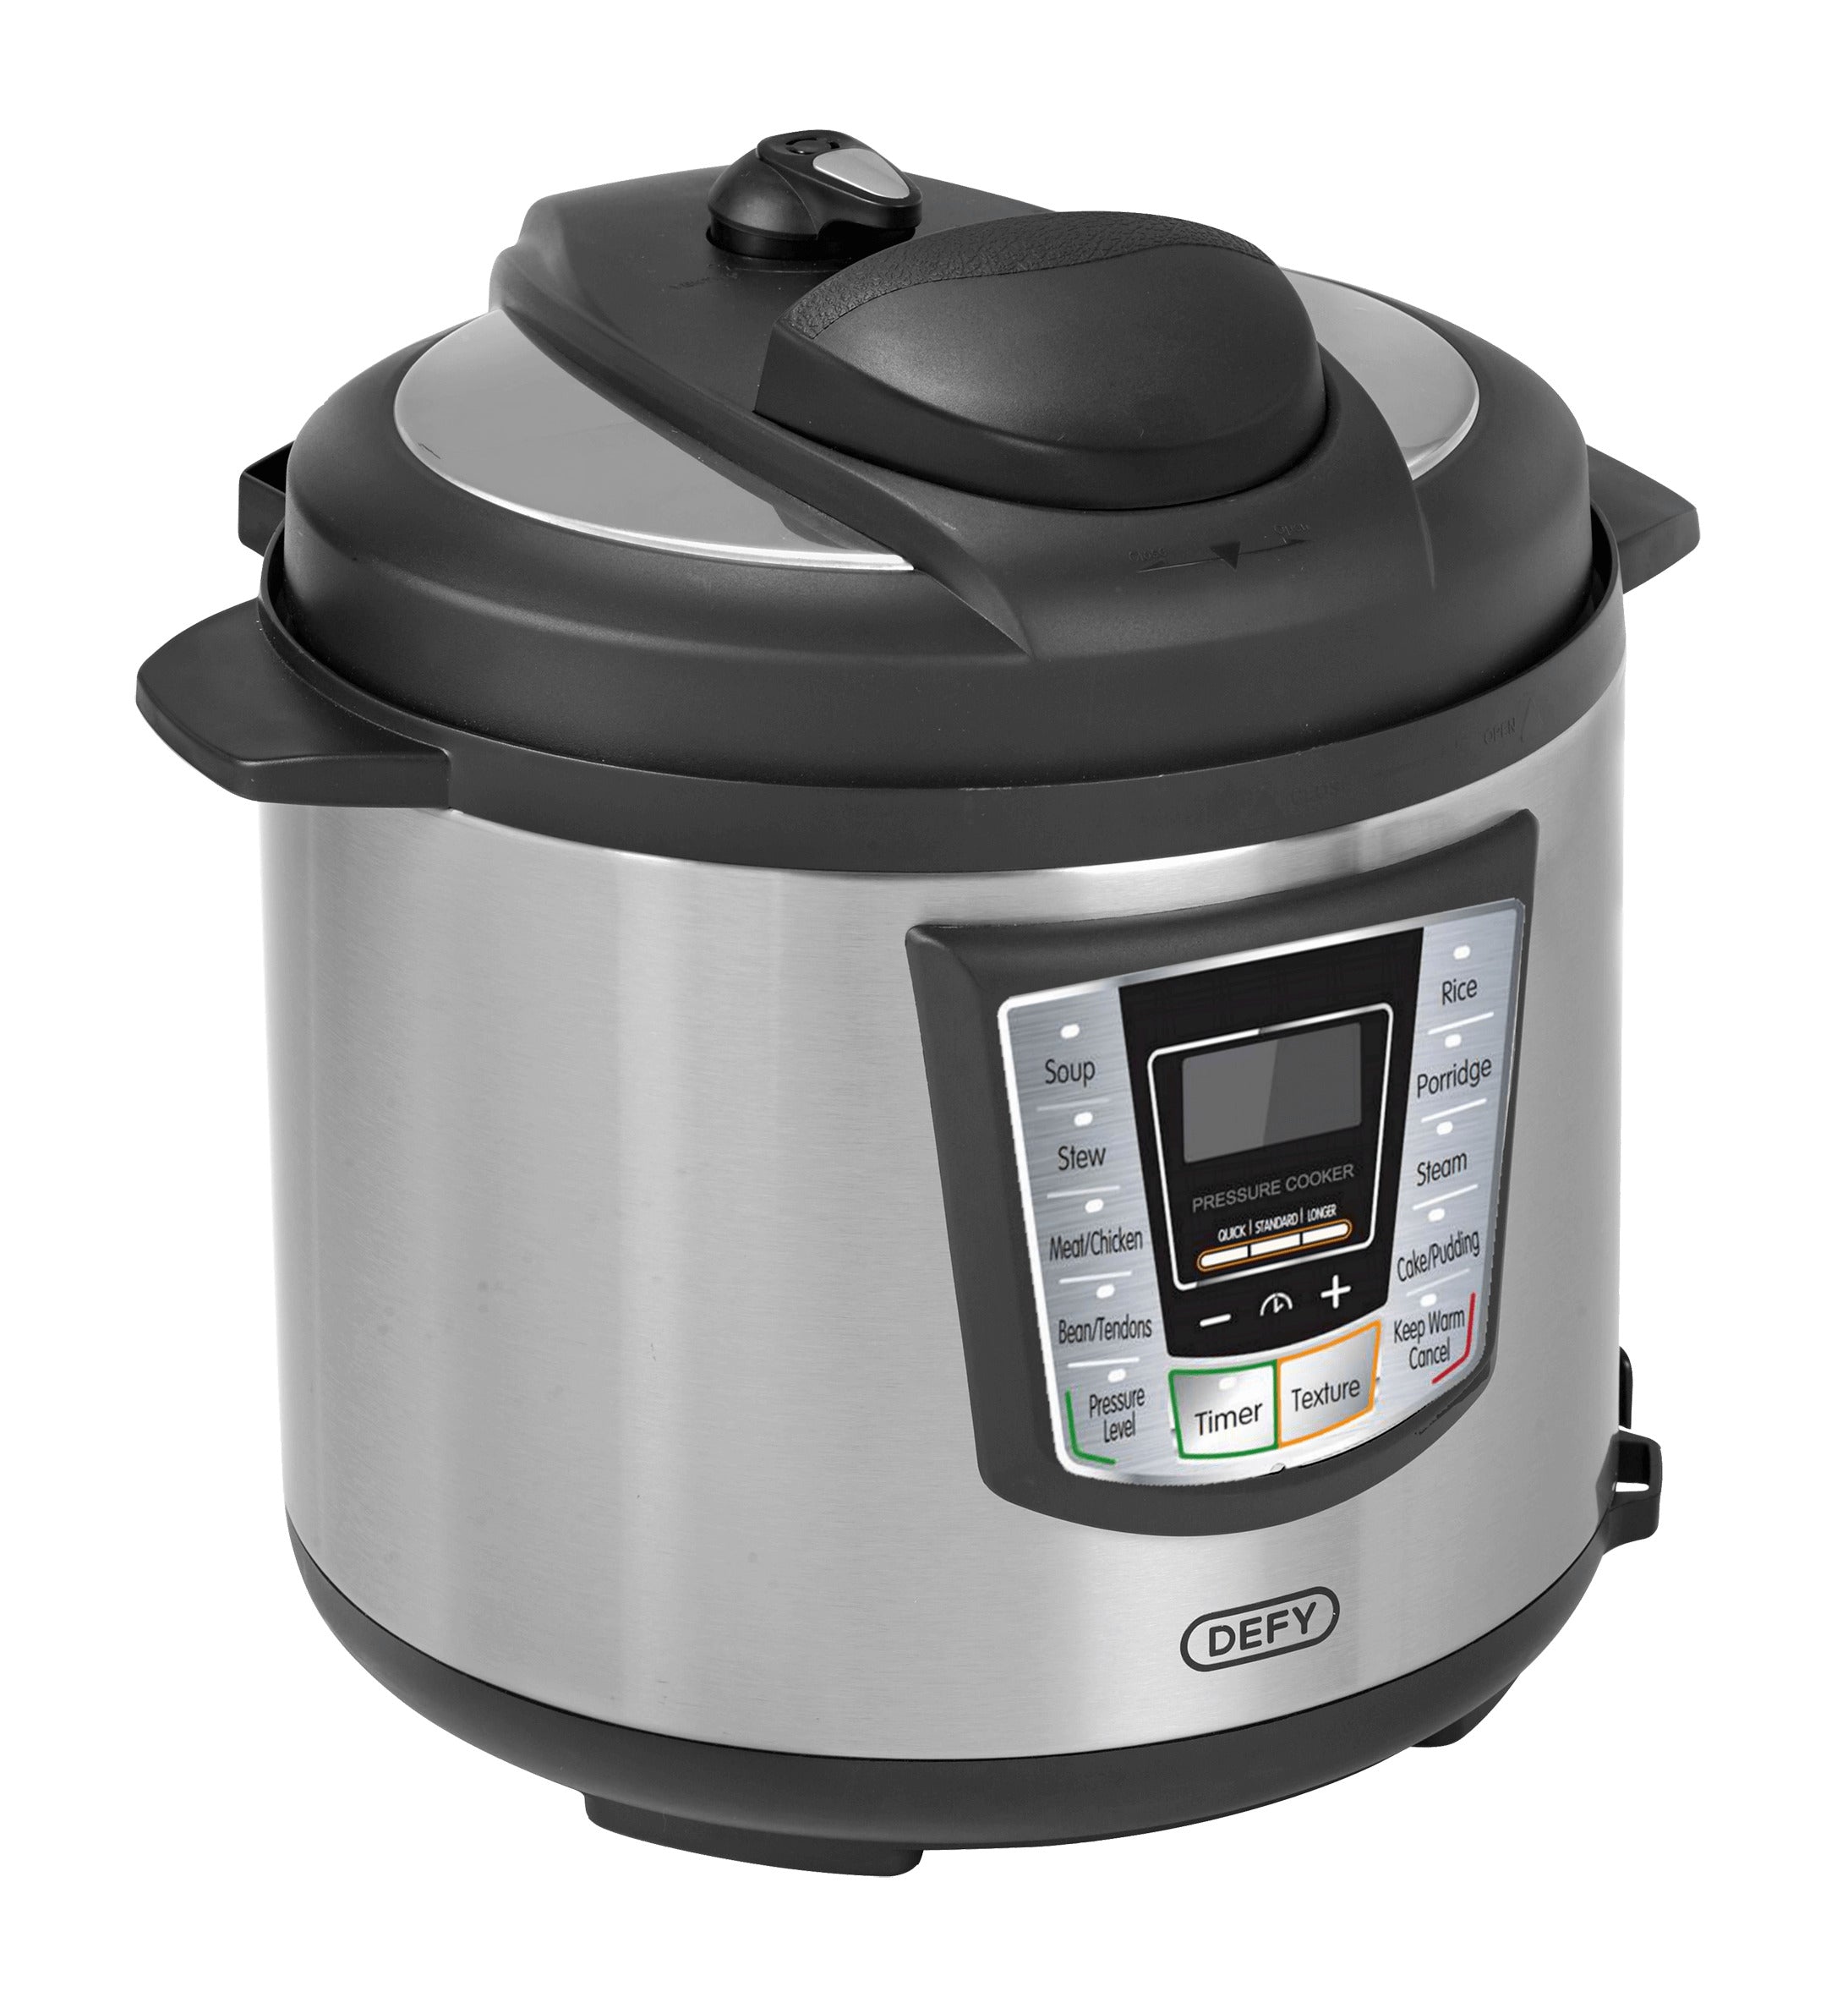 Defy 6L Pressure Cooker Stainless Steel PC600S